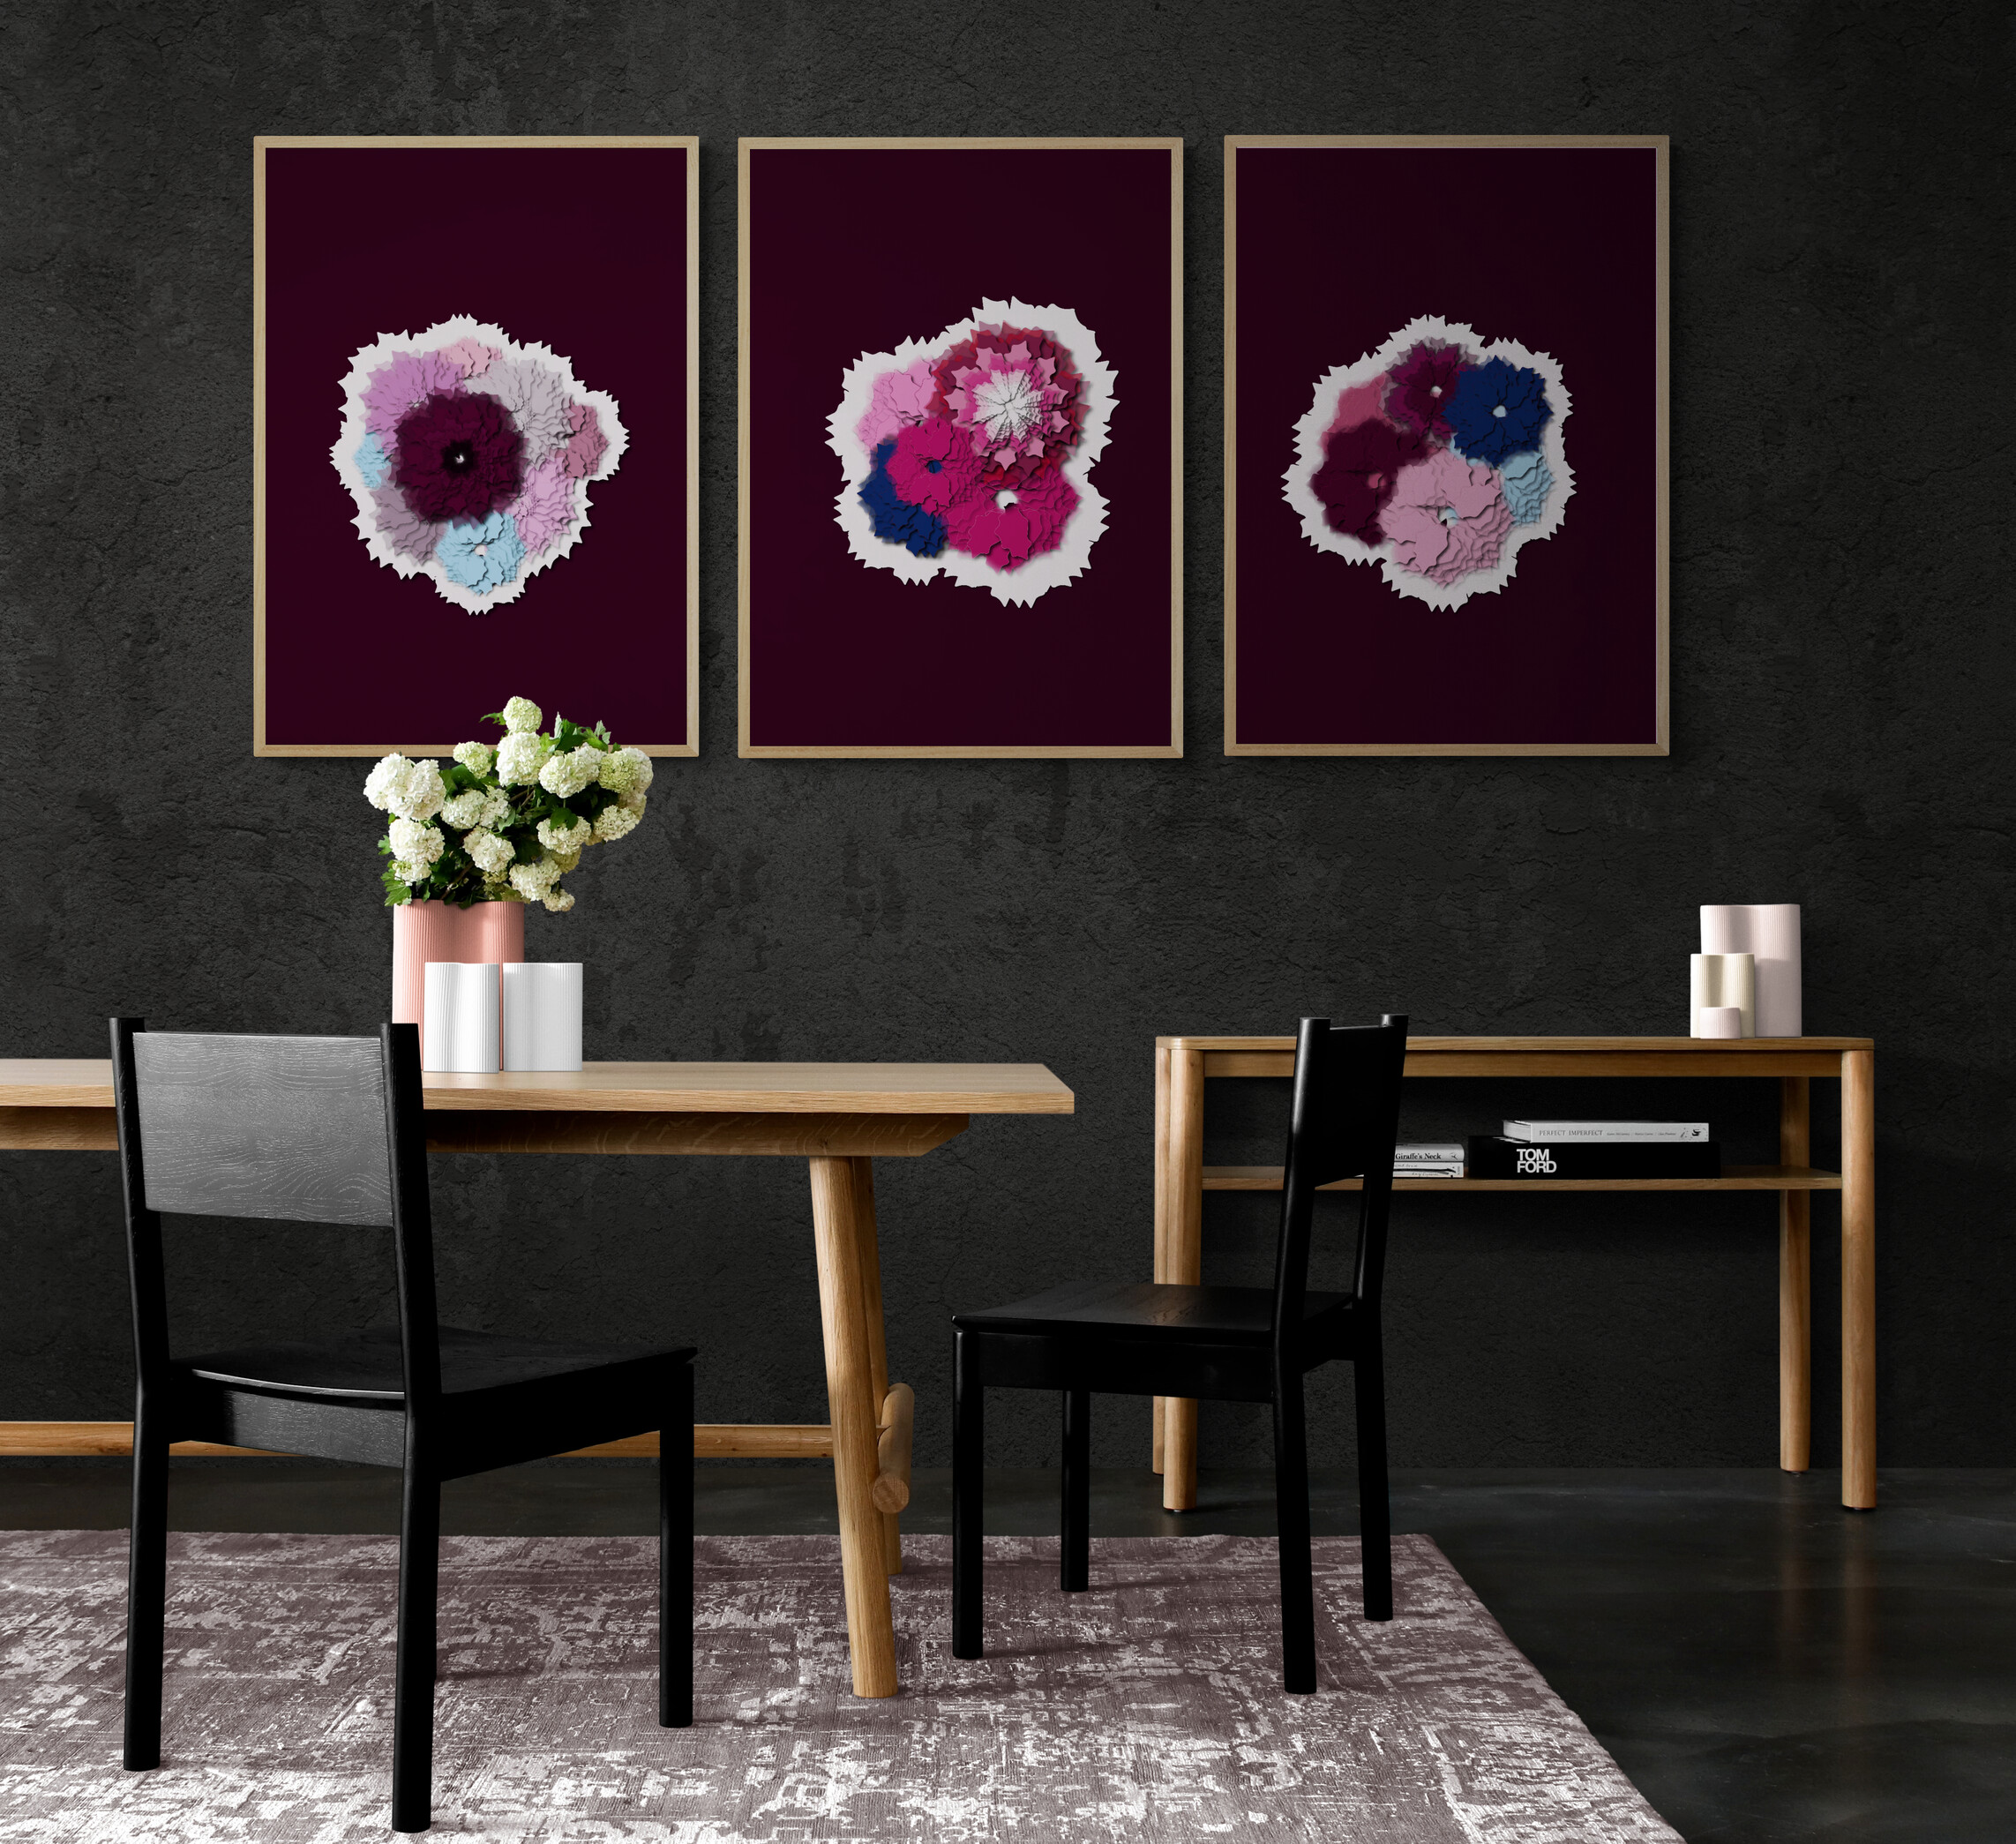 The Flowers collection of posters